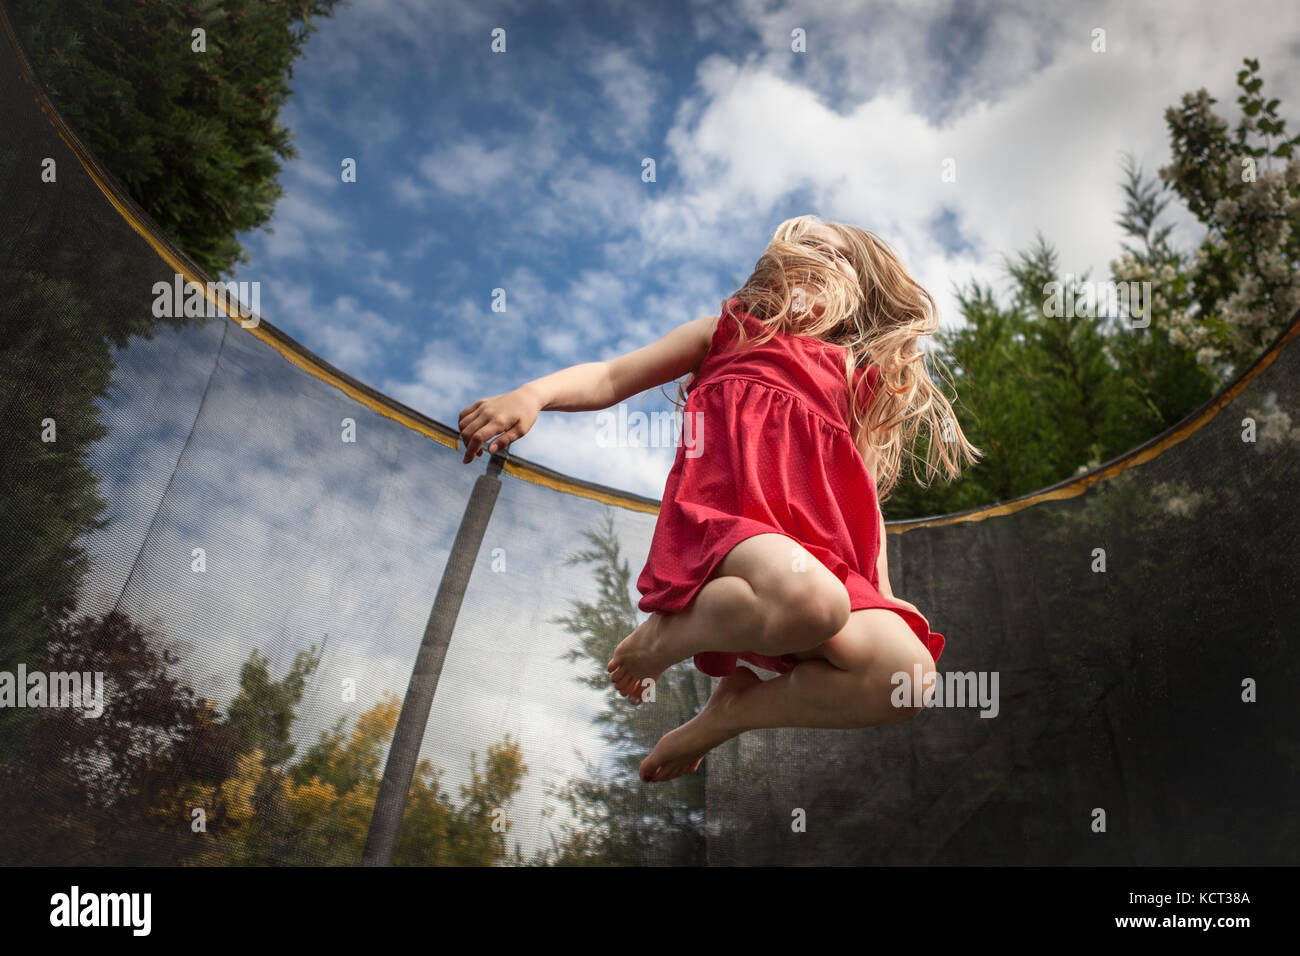 Girl jumping on trampoline Banque D'Images